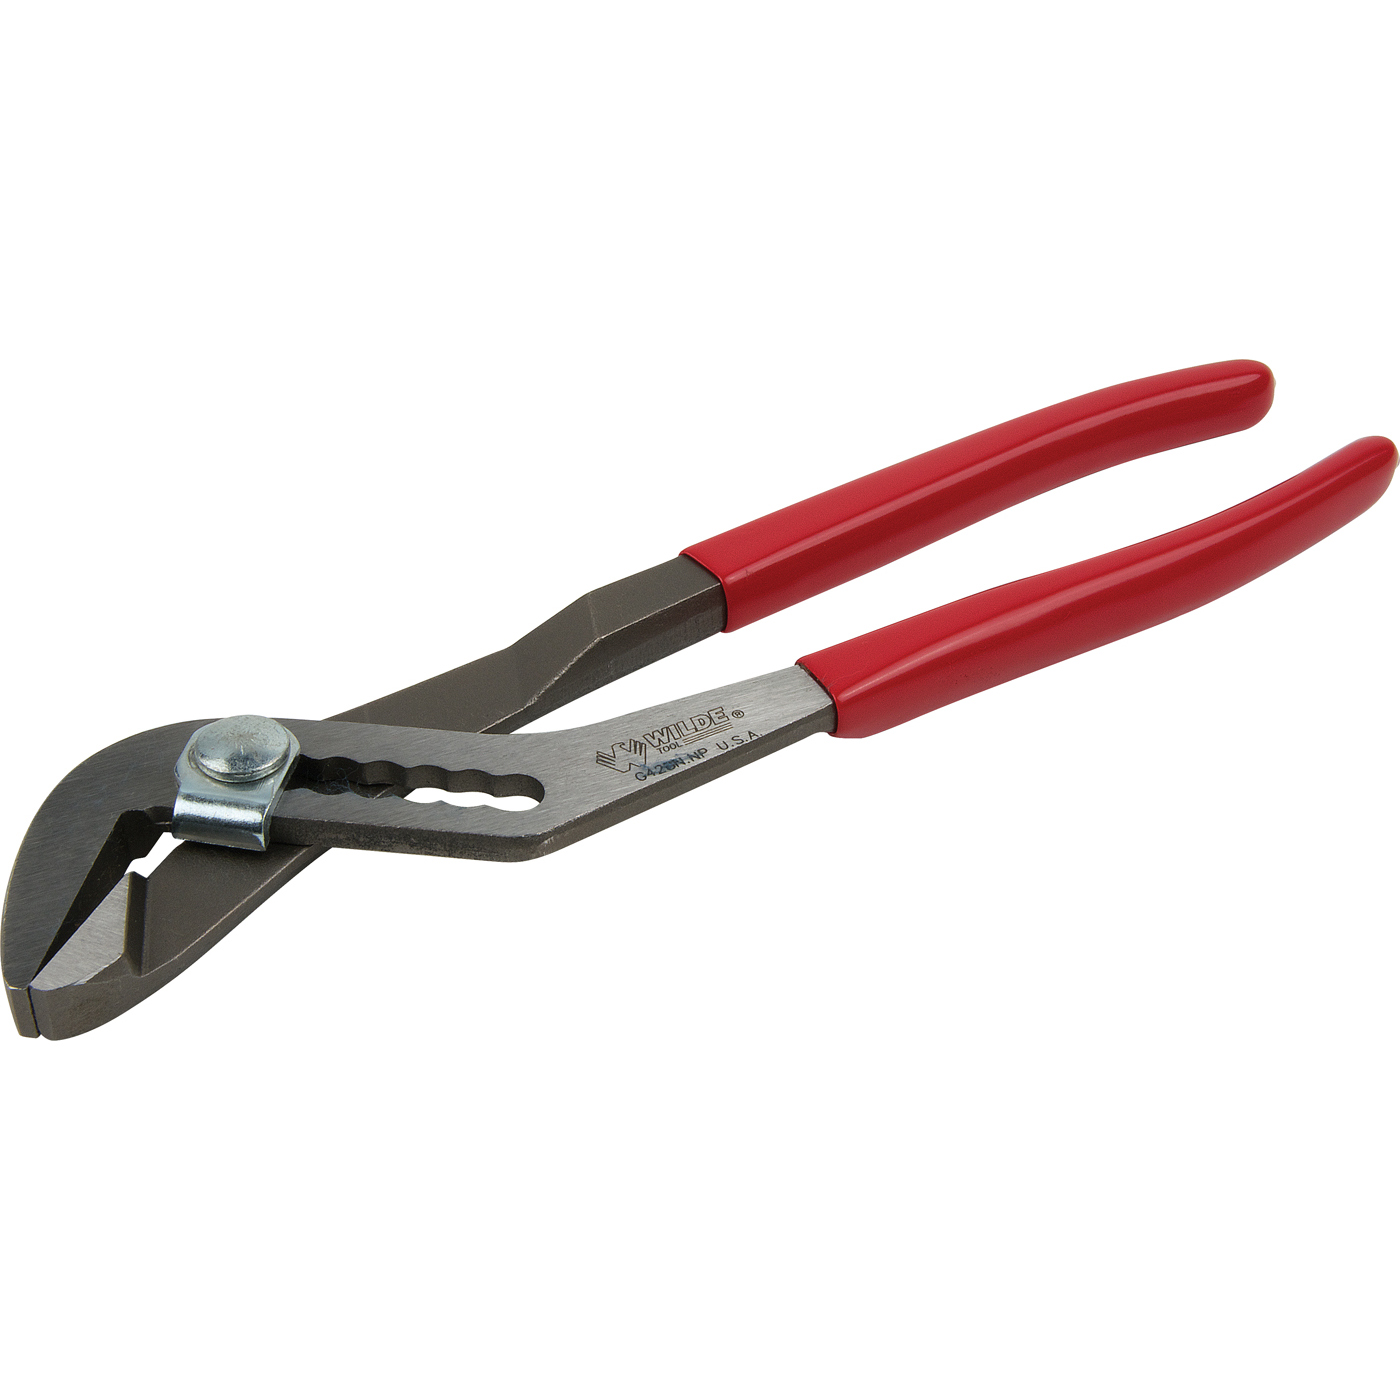 Soft jaw pliers Plumbing at